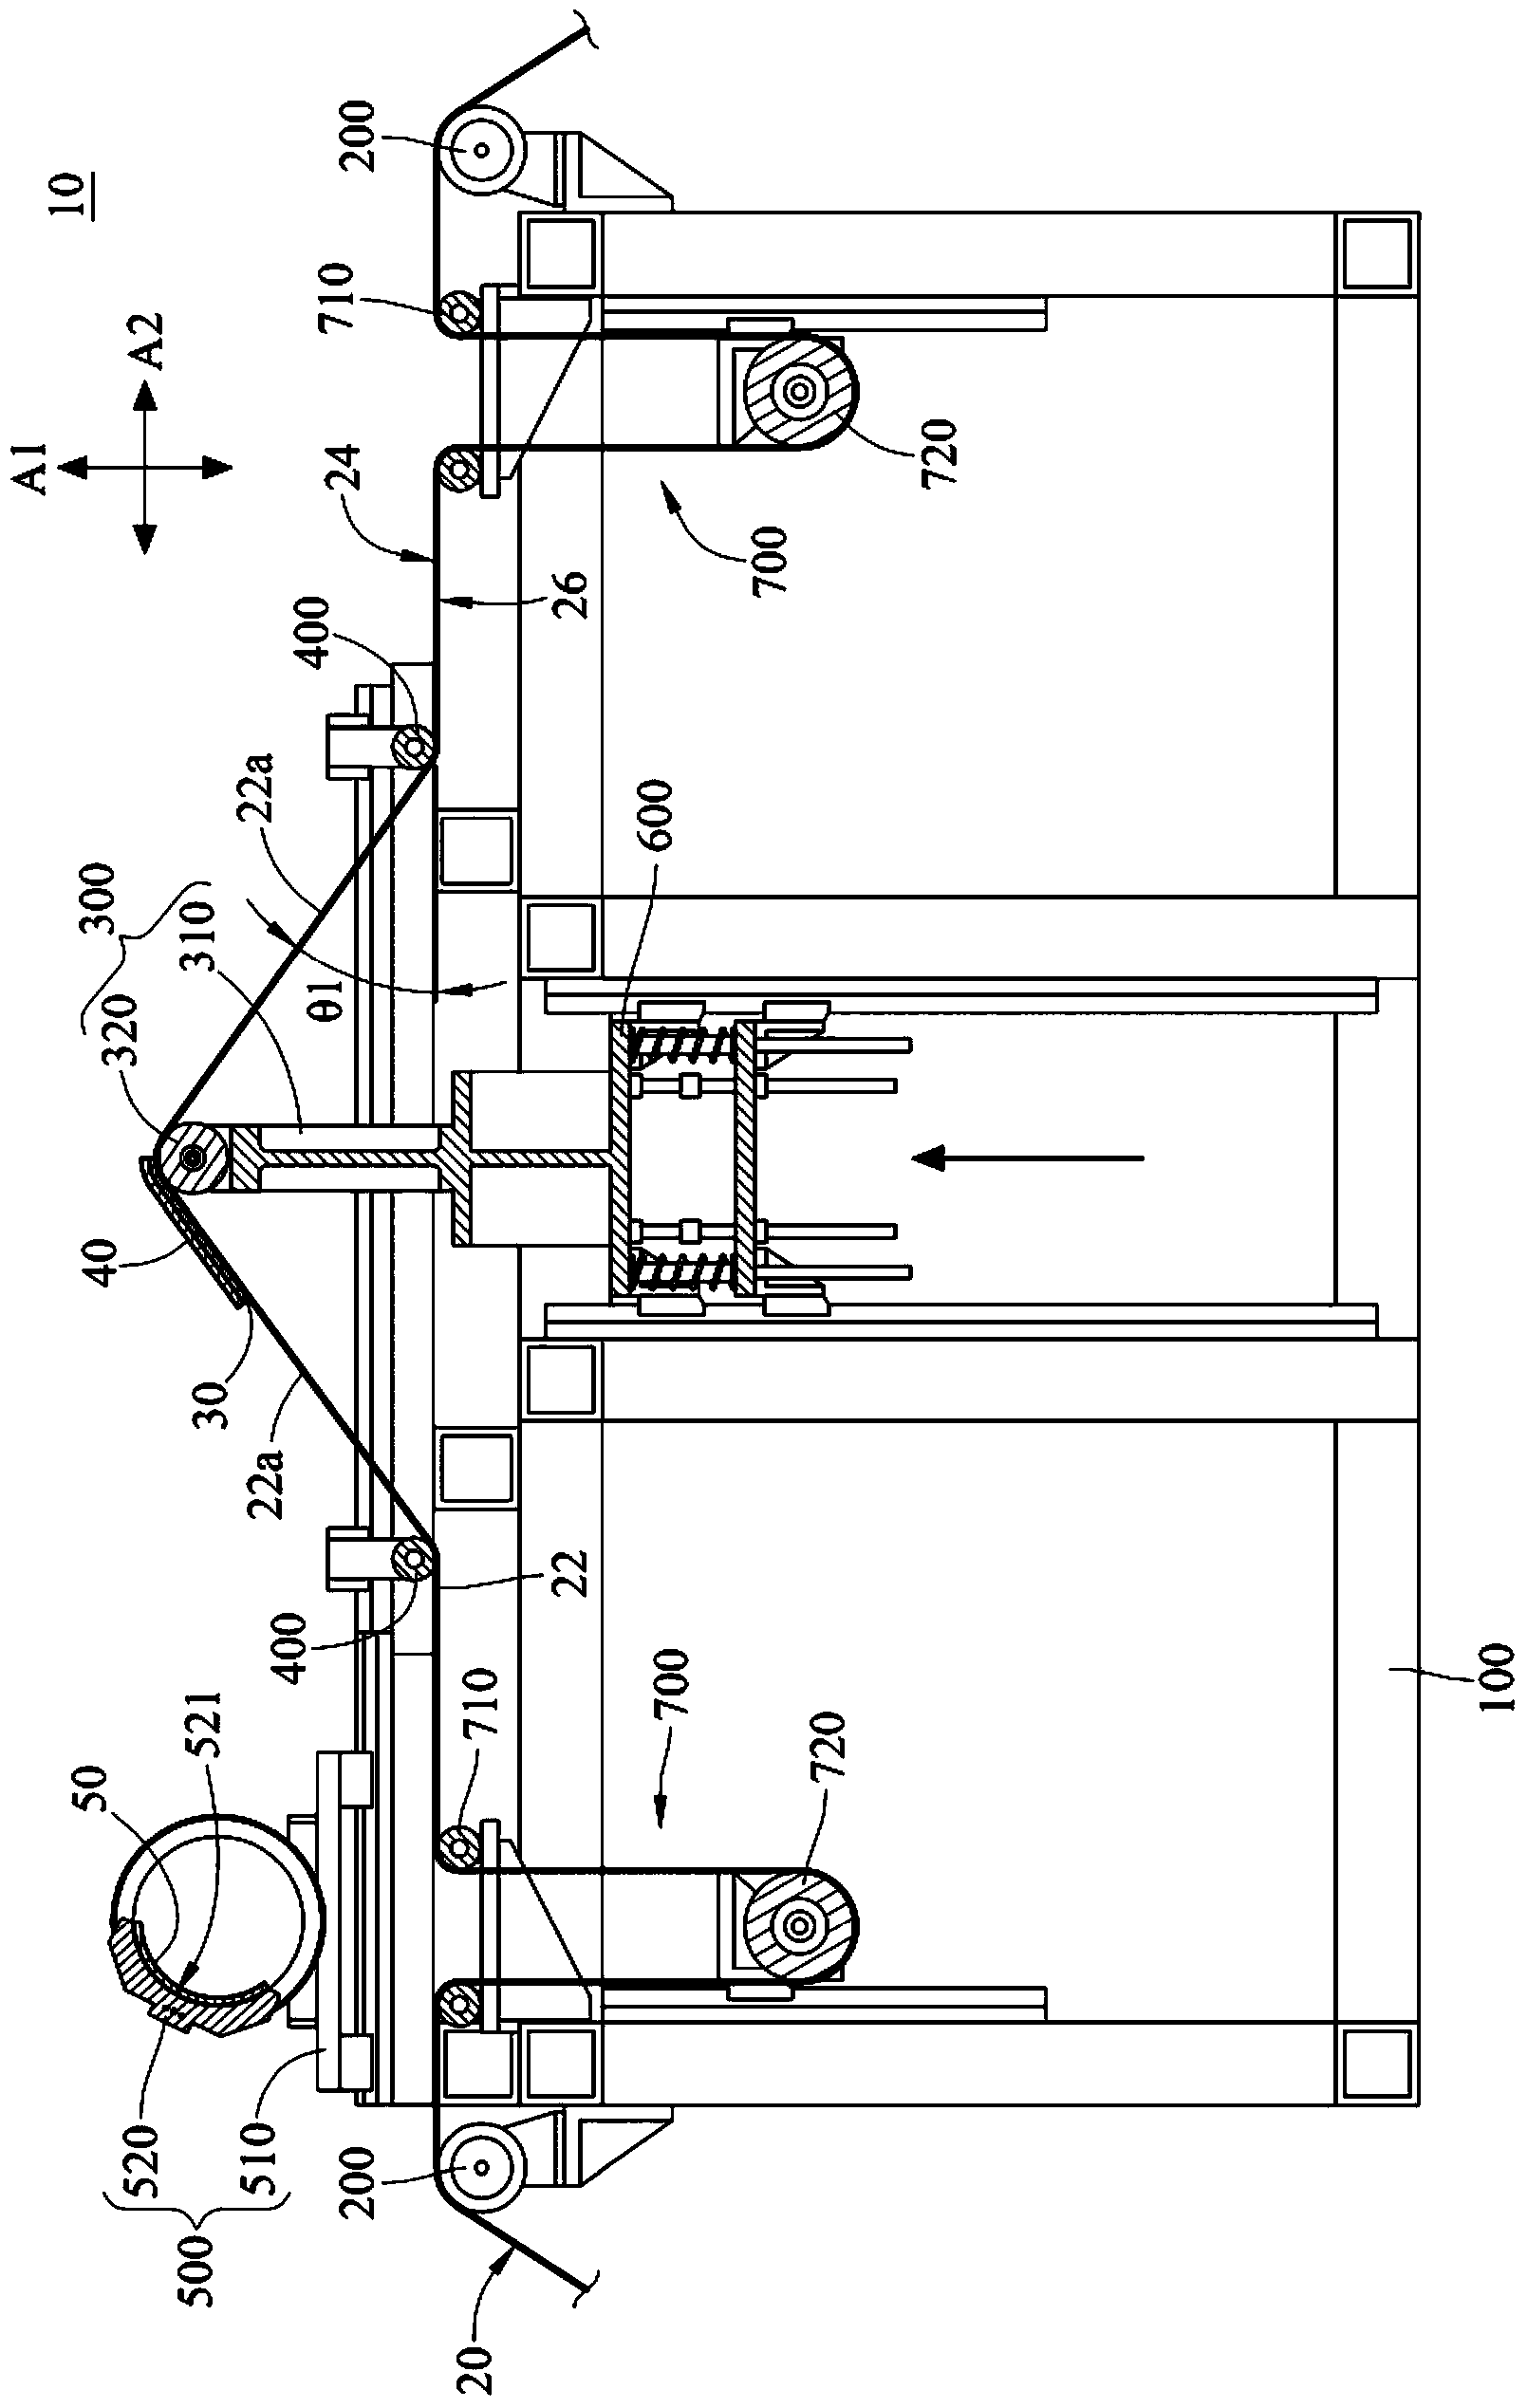 Curved surface laminating device